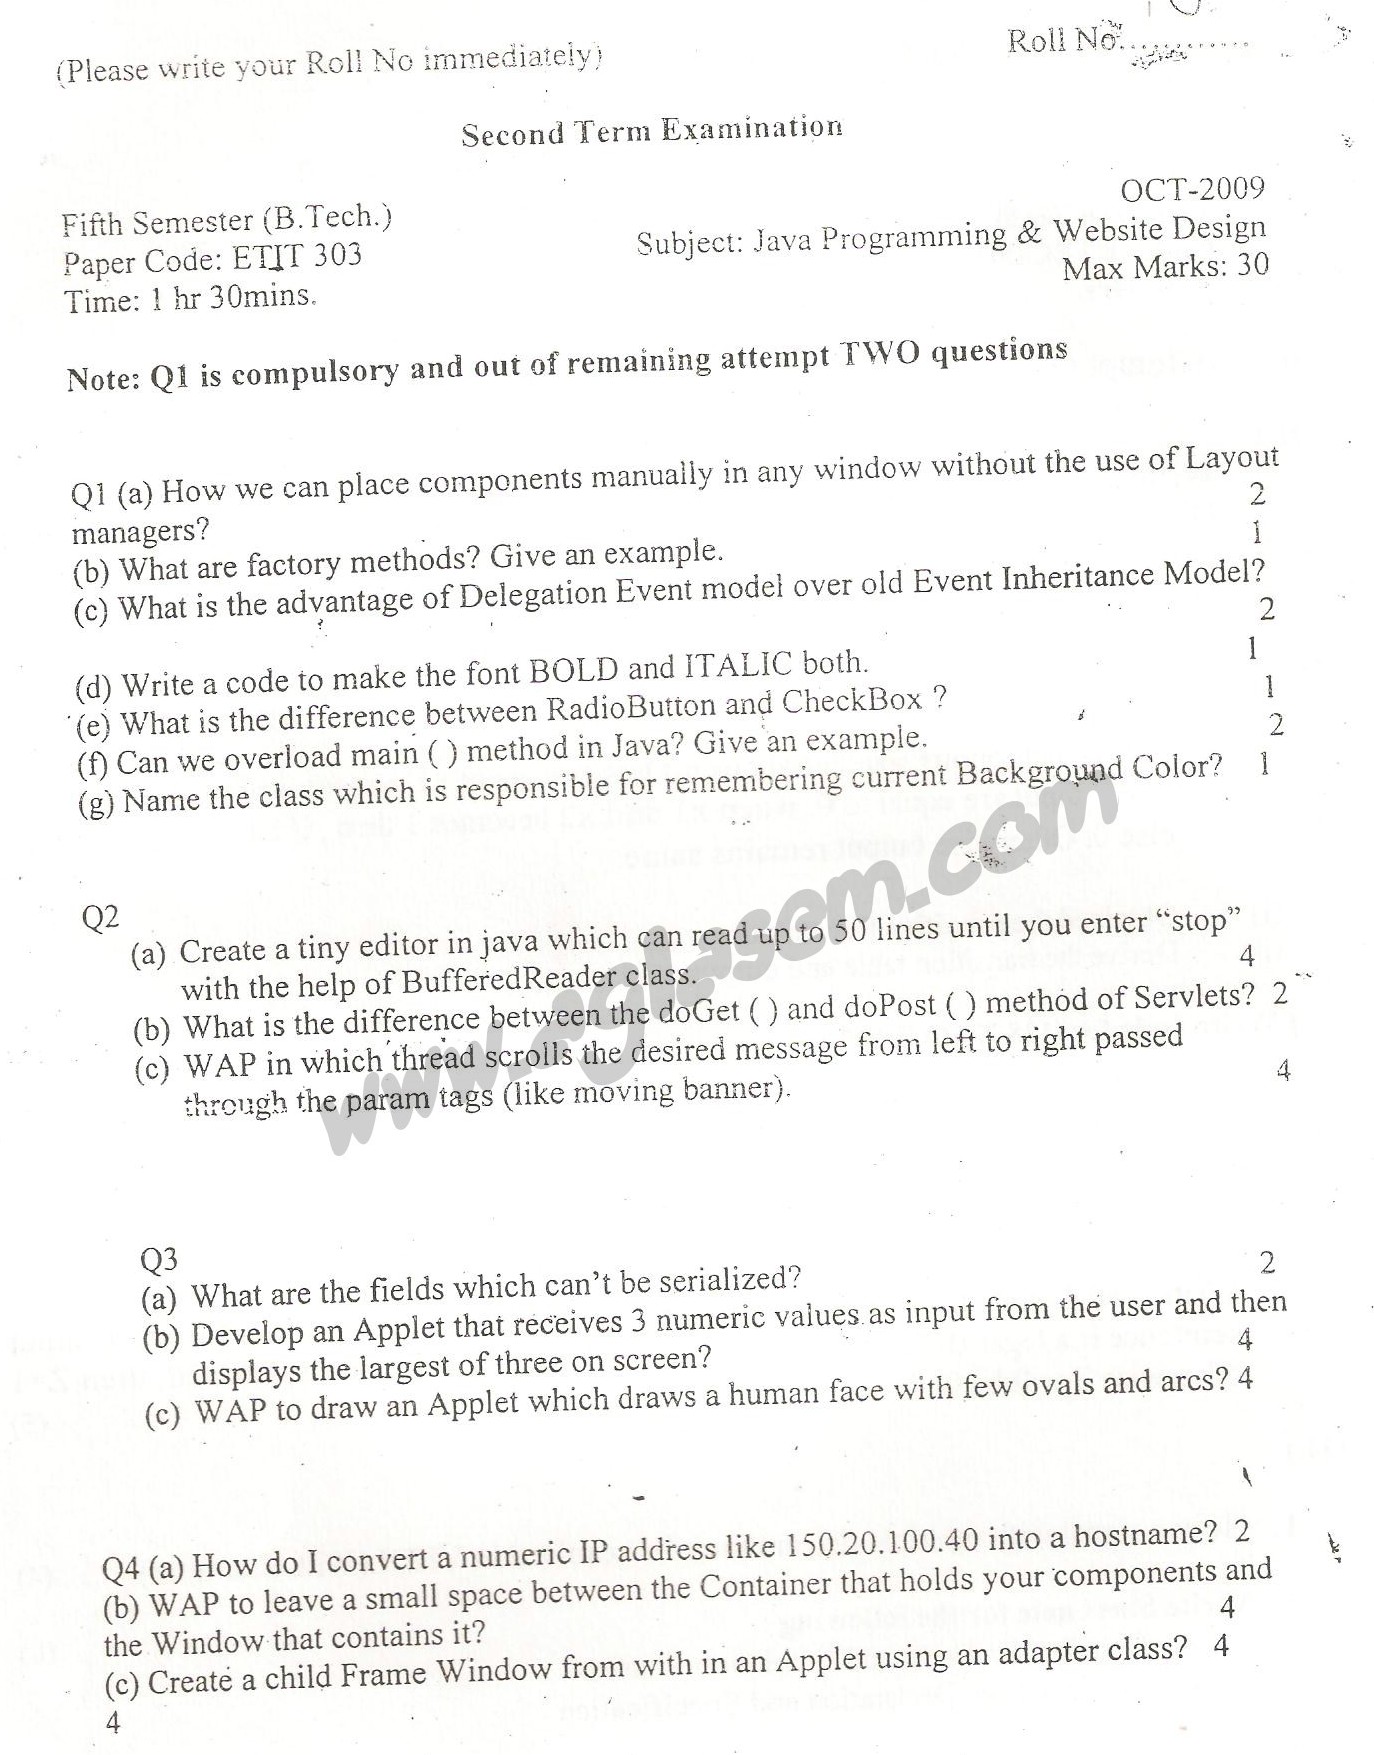 GGSIPU Question Papers Fifth Semester  Second Term 2009  ETIT-303